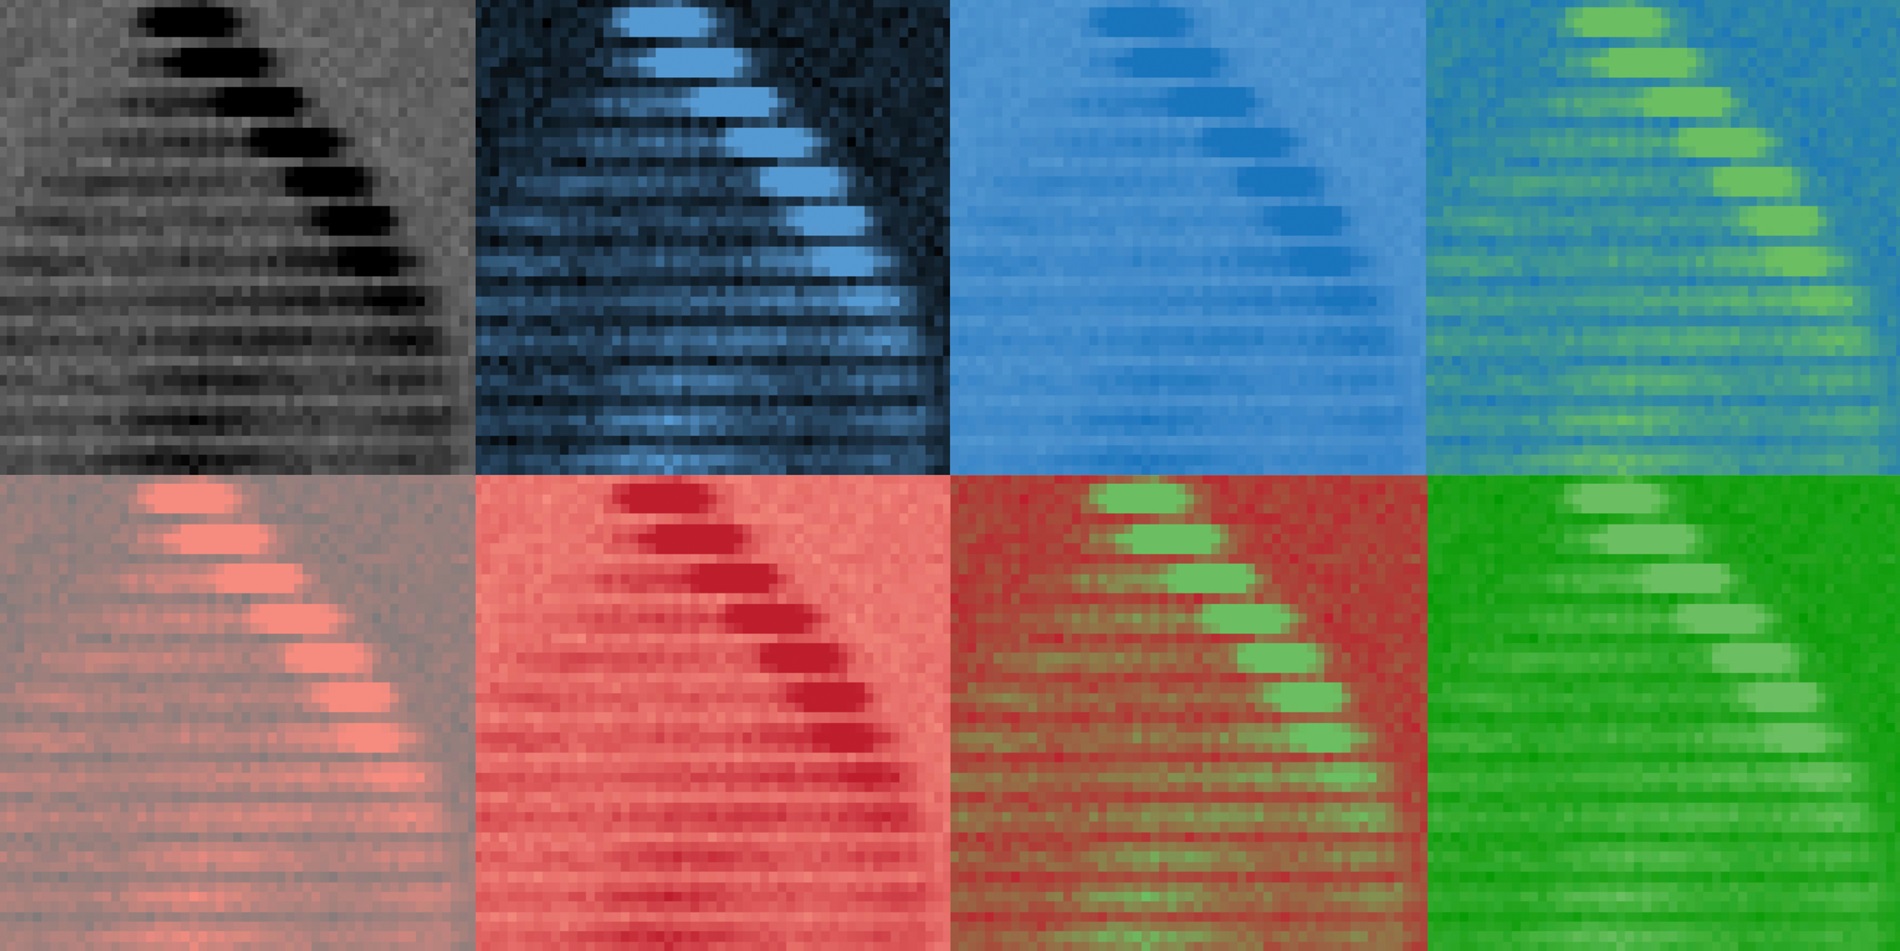 The results of the ETH researchers as an homage to Andy Warhol. The image shows the experimental results of topological pumping